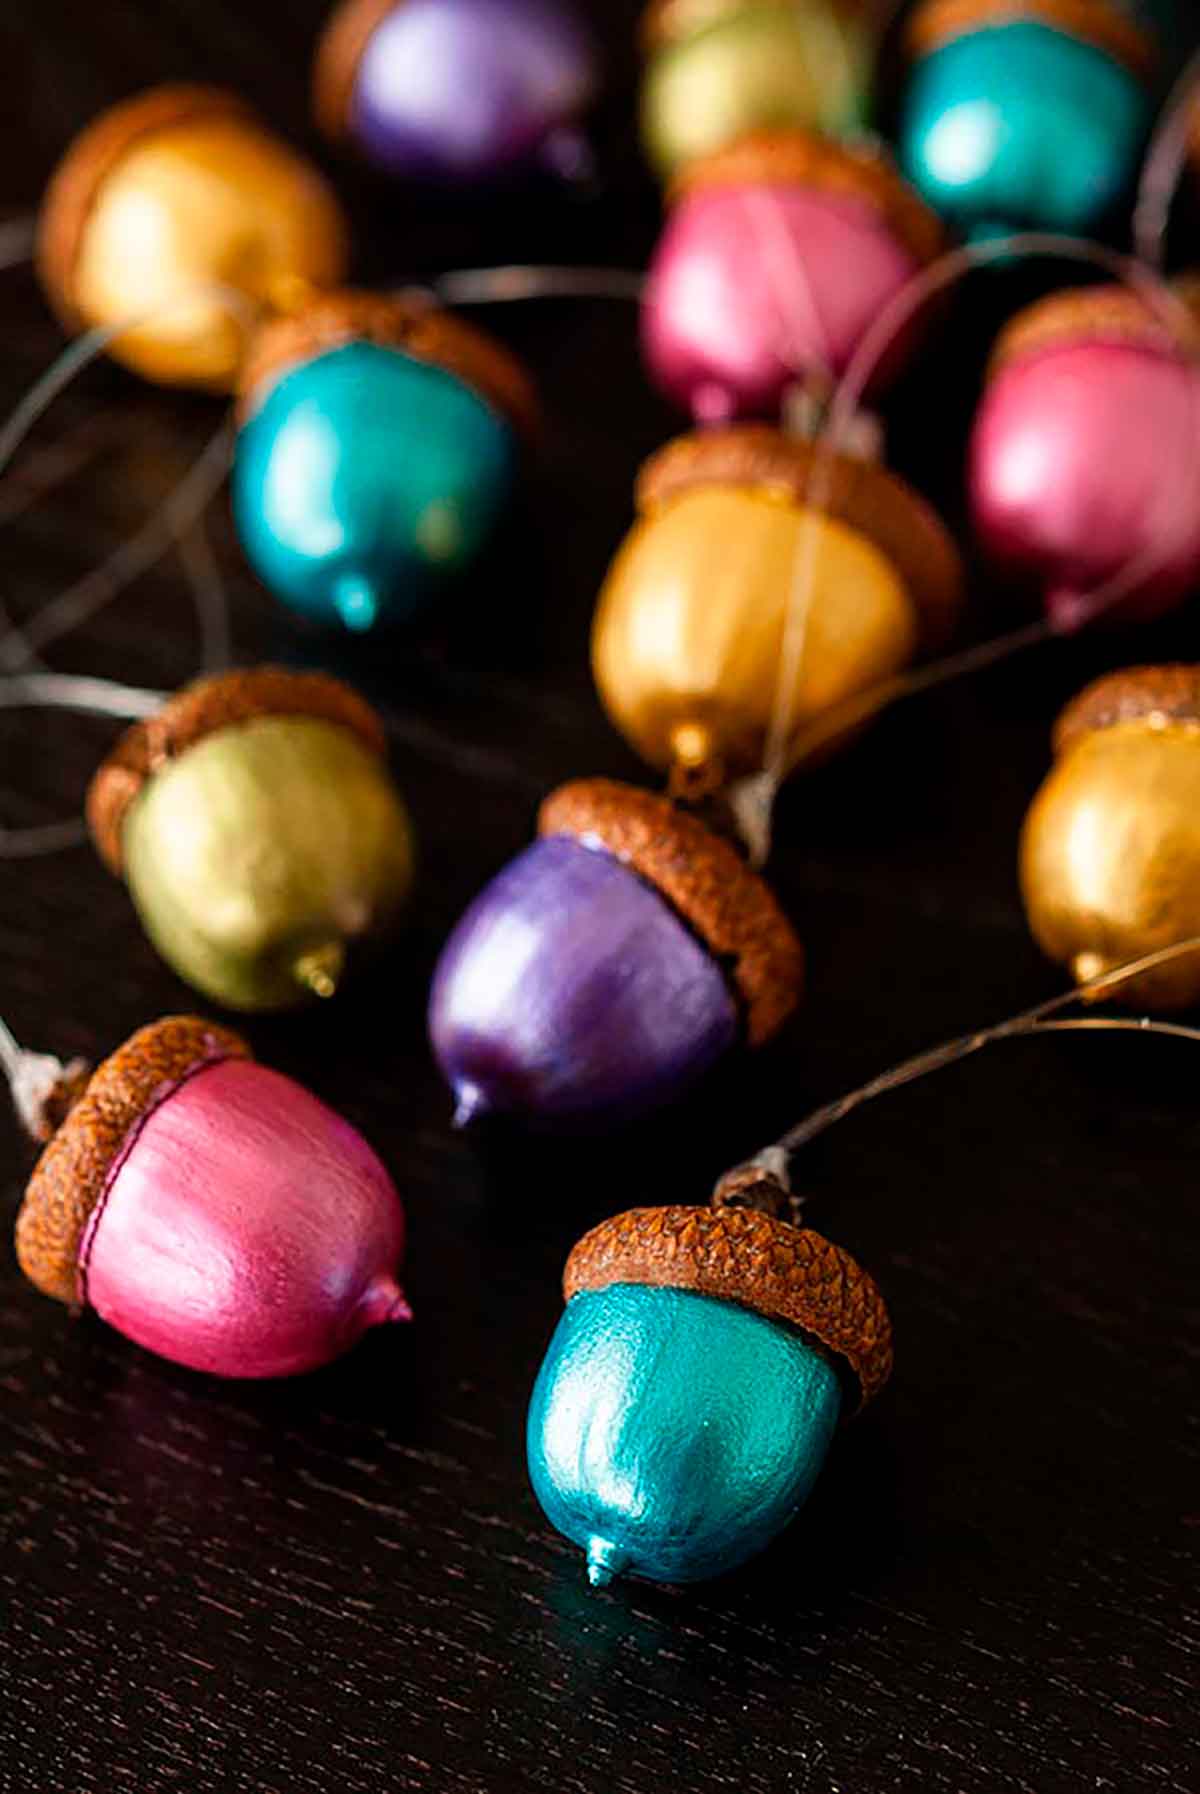 12 painted acorn ornaments on a table, in different colors.